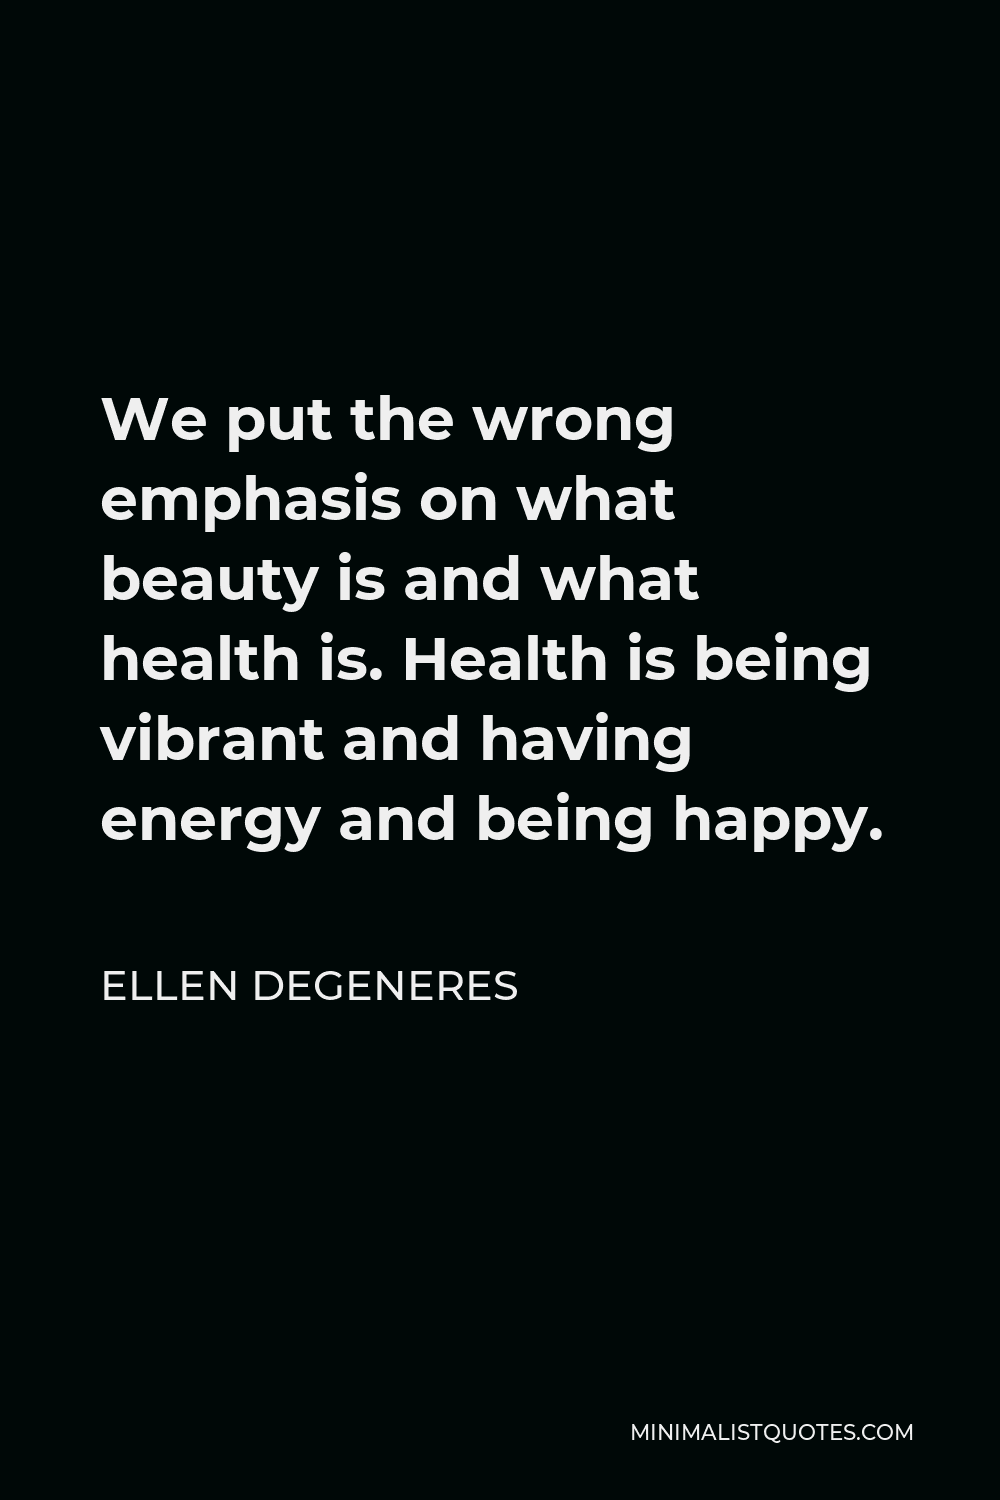 Ellen DeGeneres Quote - We put the wrong emphasis on what beauty is and what health is. Health is being vibrant and having energy and being happy.